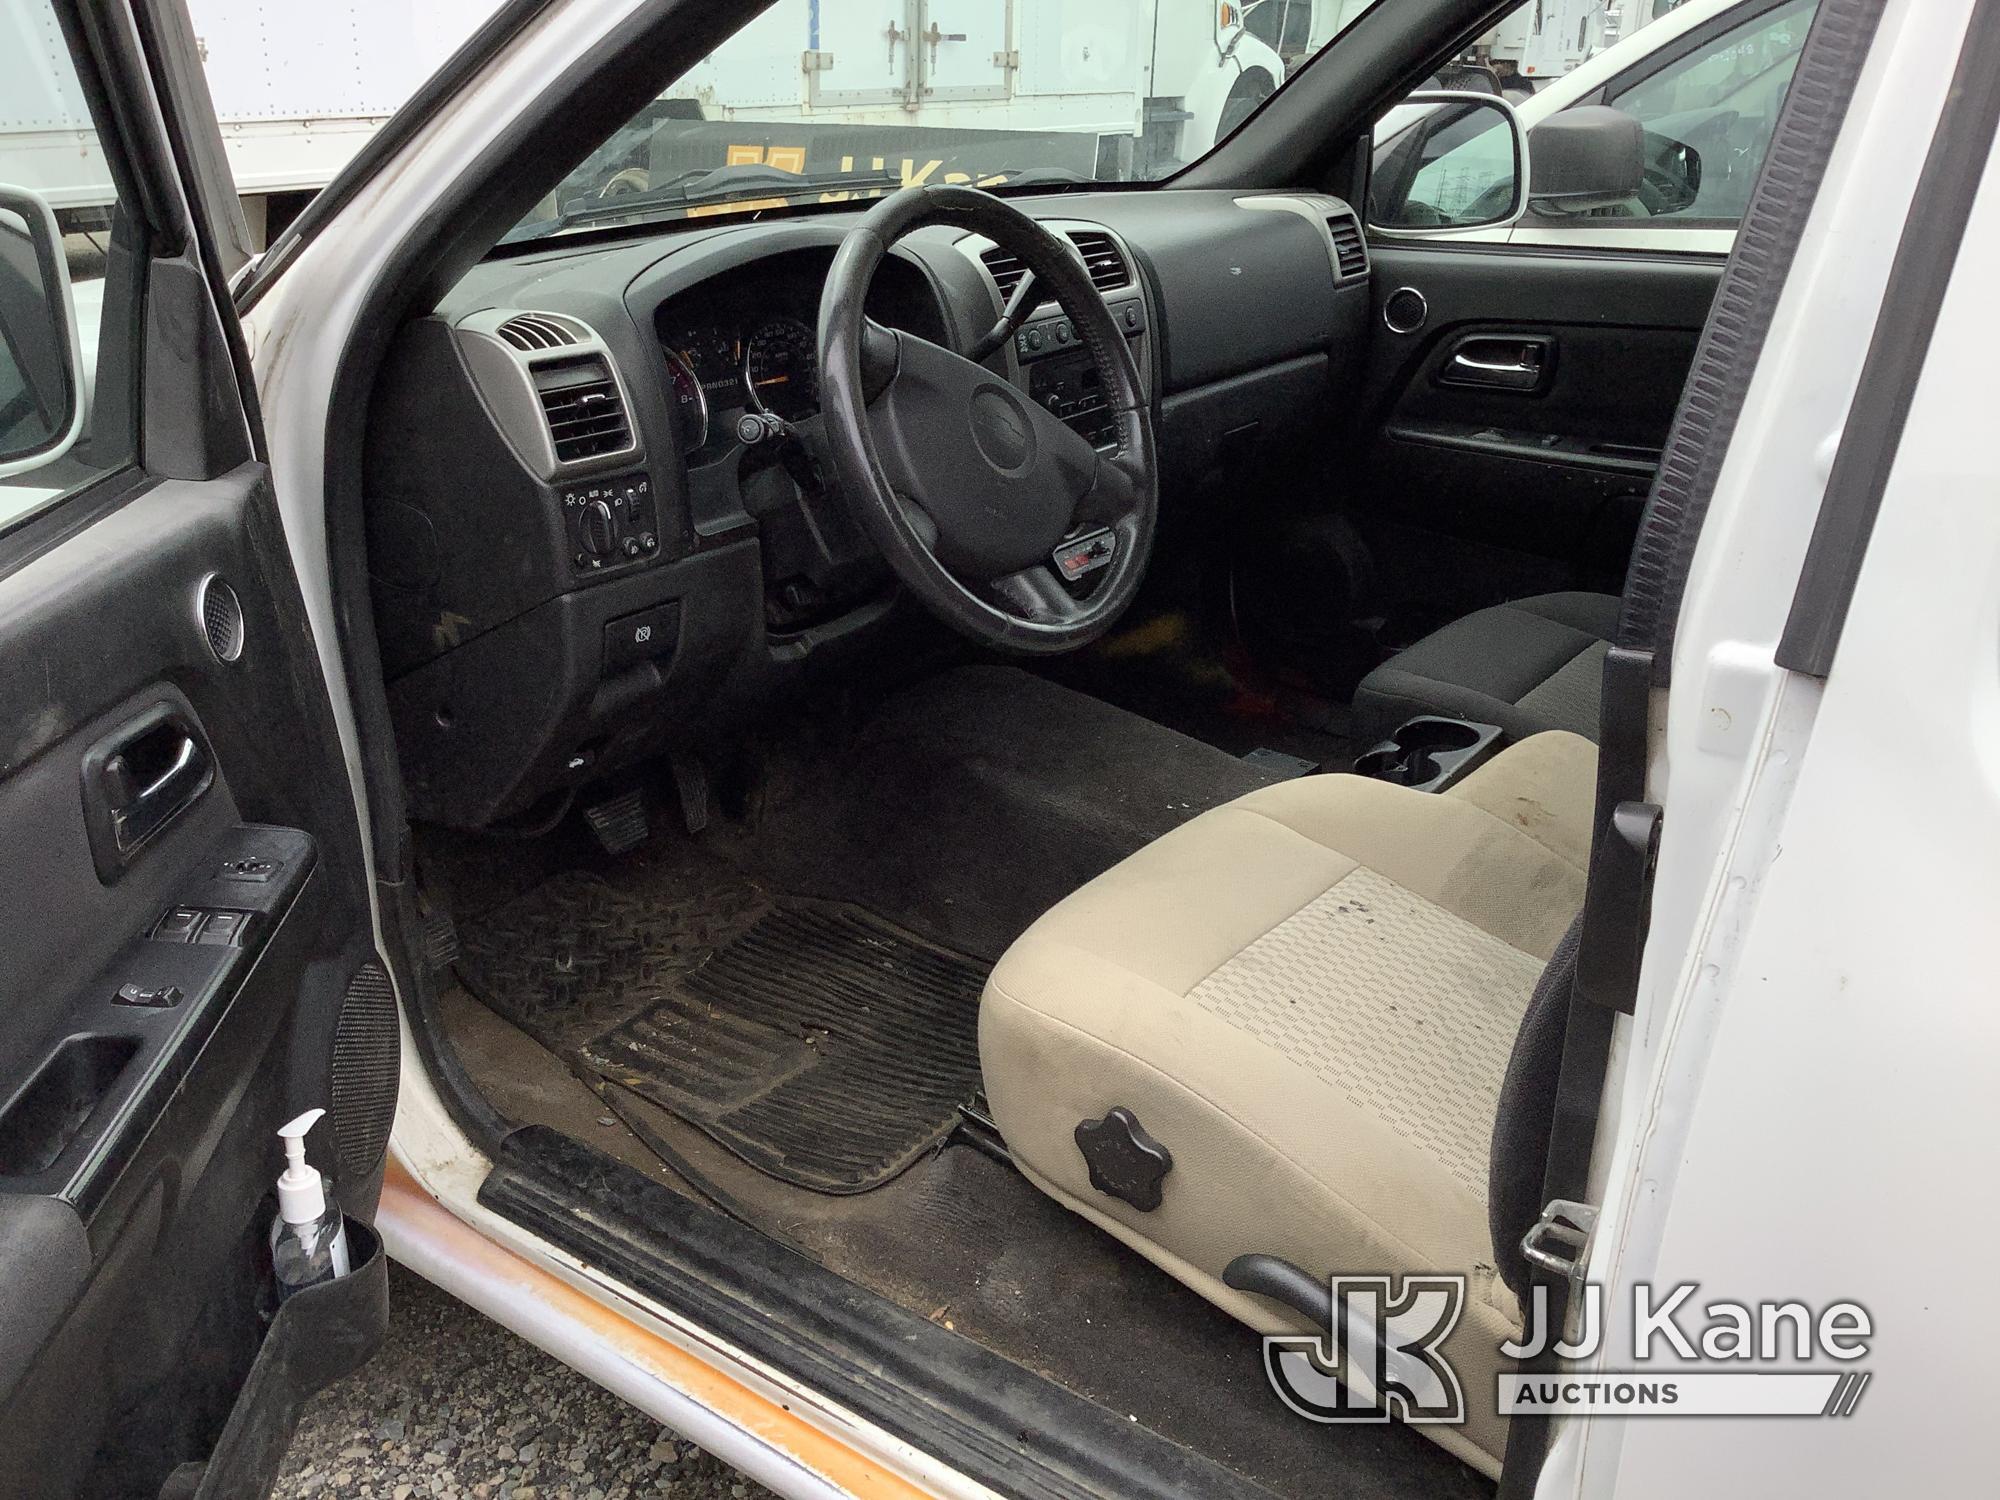 (Plymouth Meeting, PA) 2010 Chevrolet Colorado 4x4 Extended-Cab Pickup Truck No Key, Not Running, Co